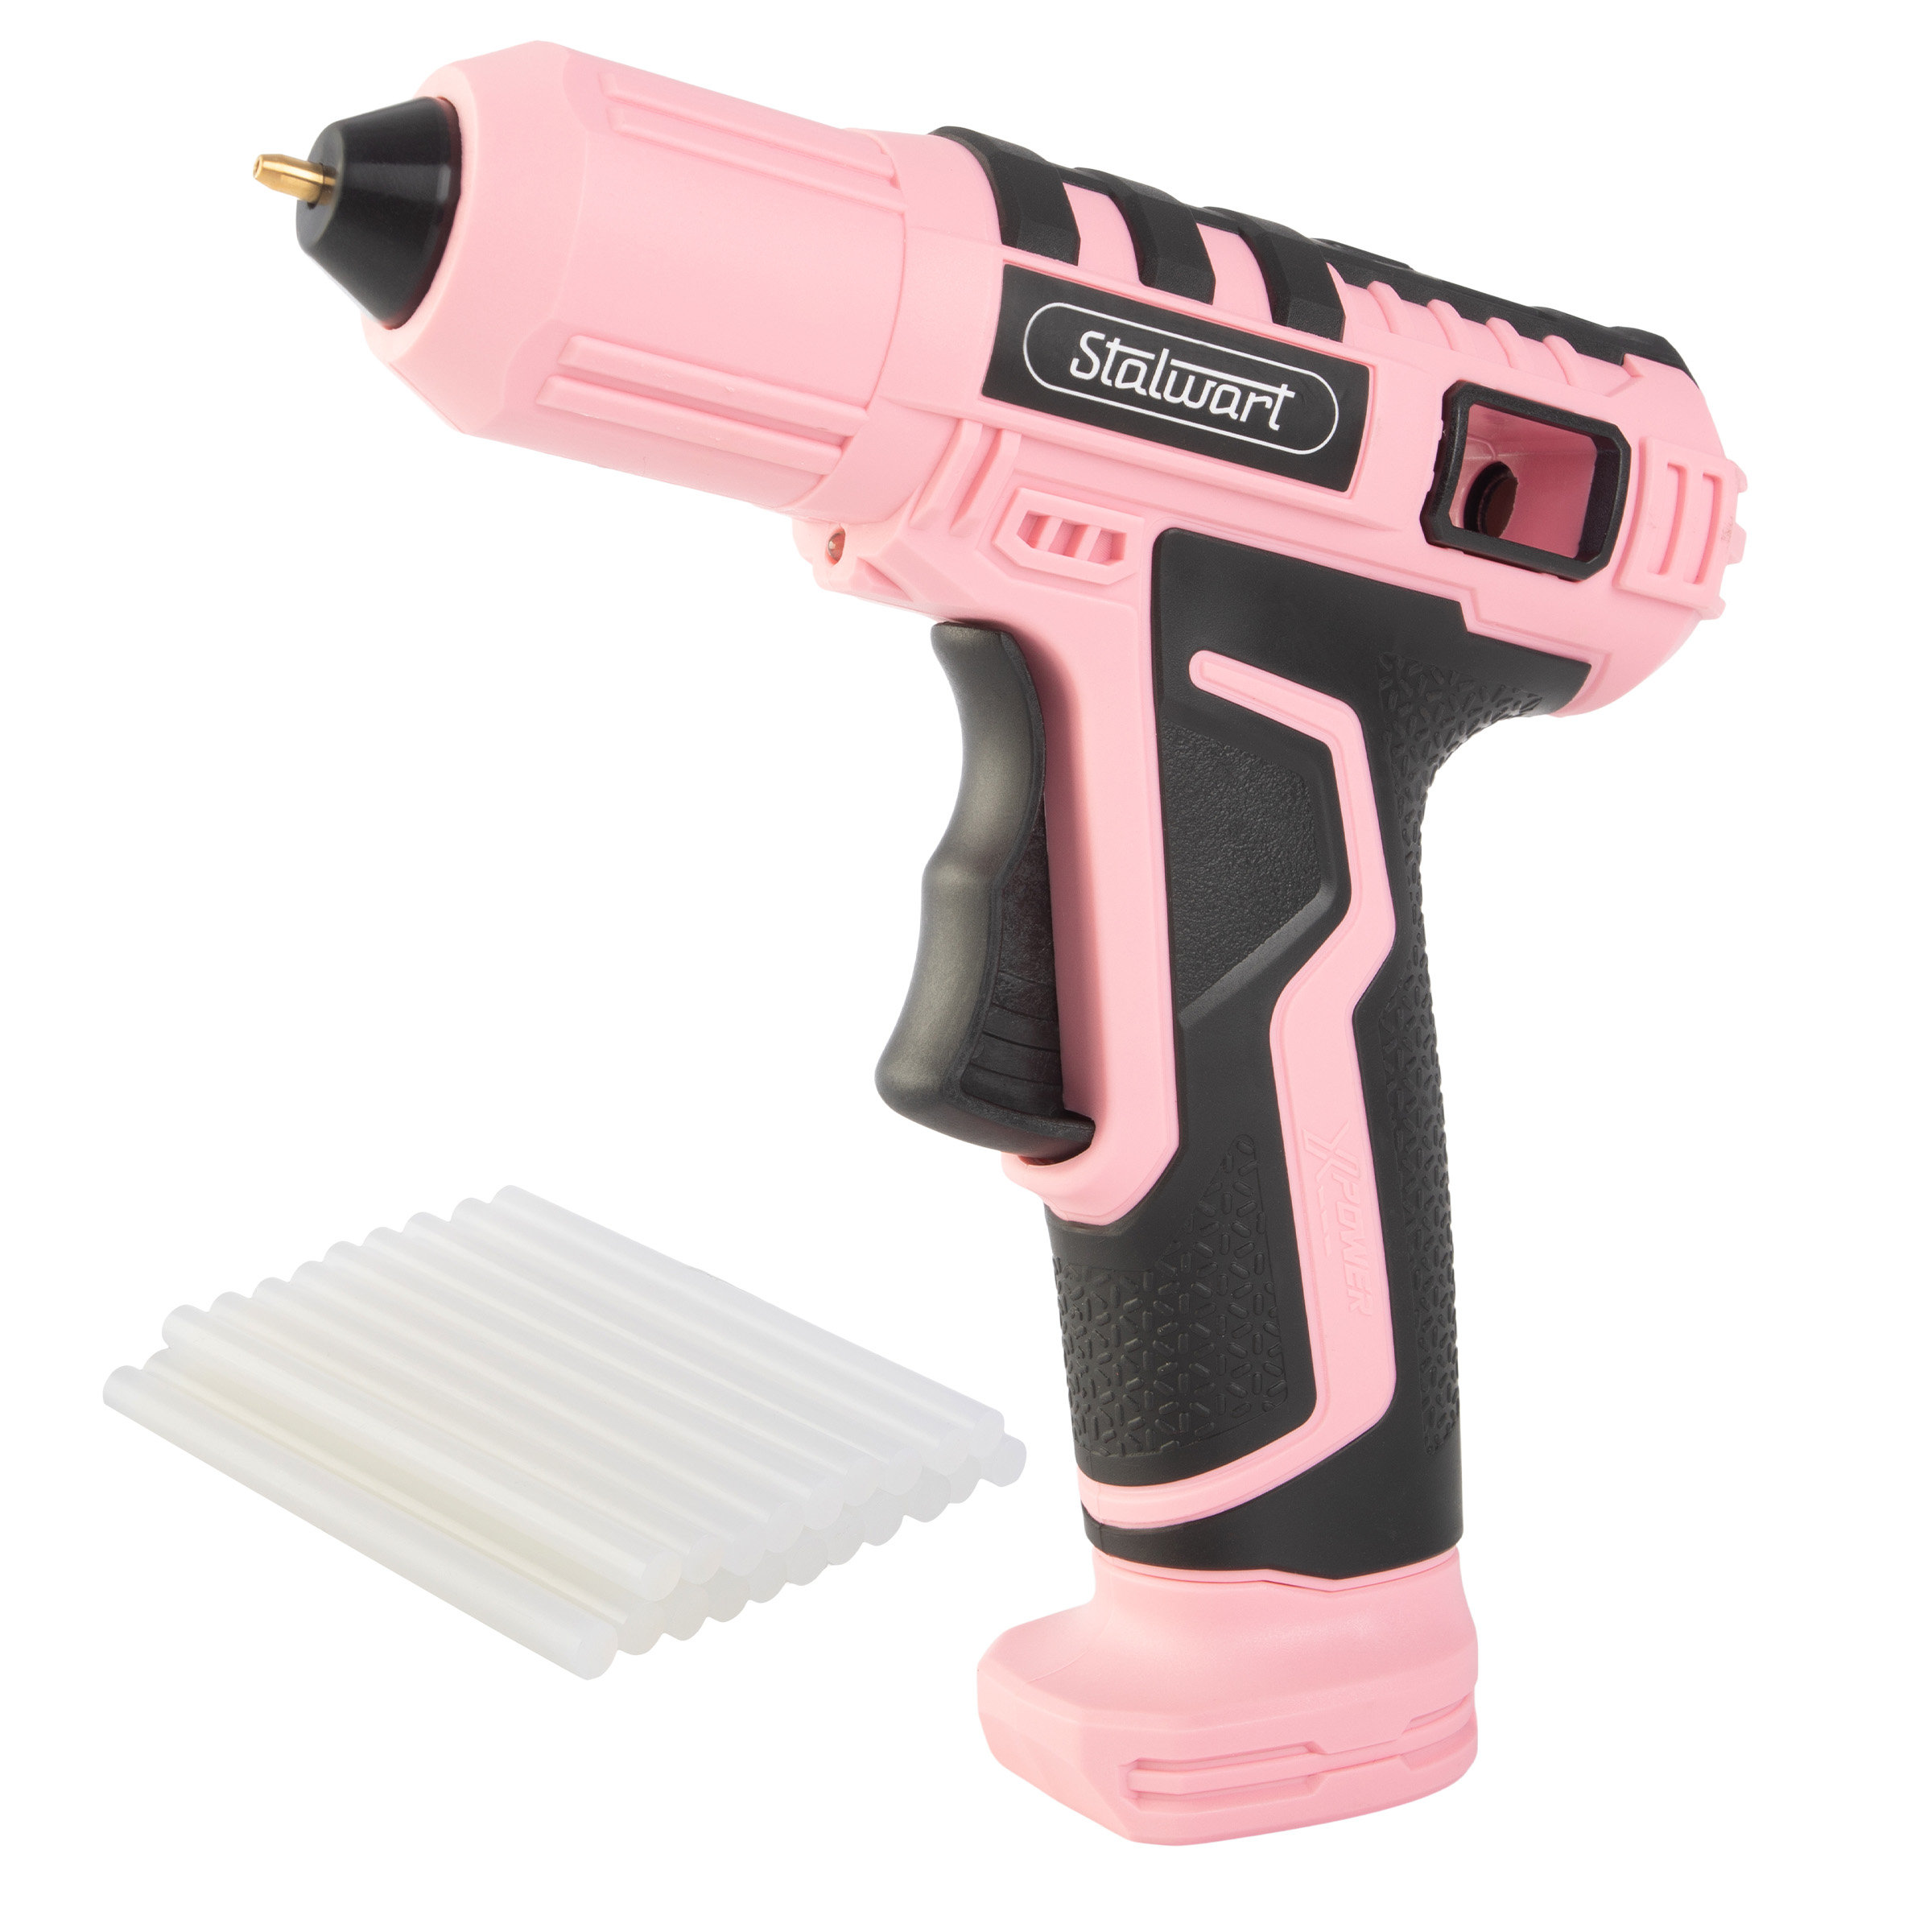 When you want a cordless glue gun but don't want to invest in a new